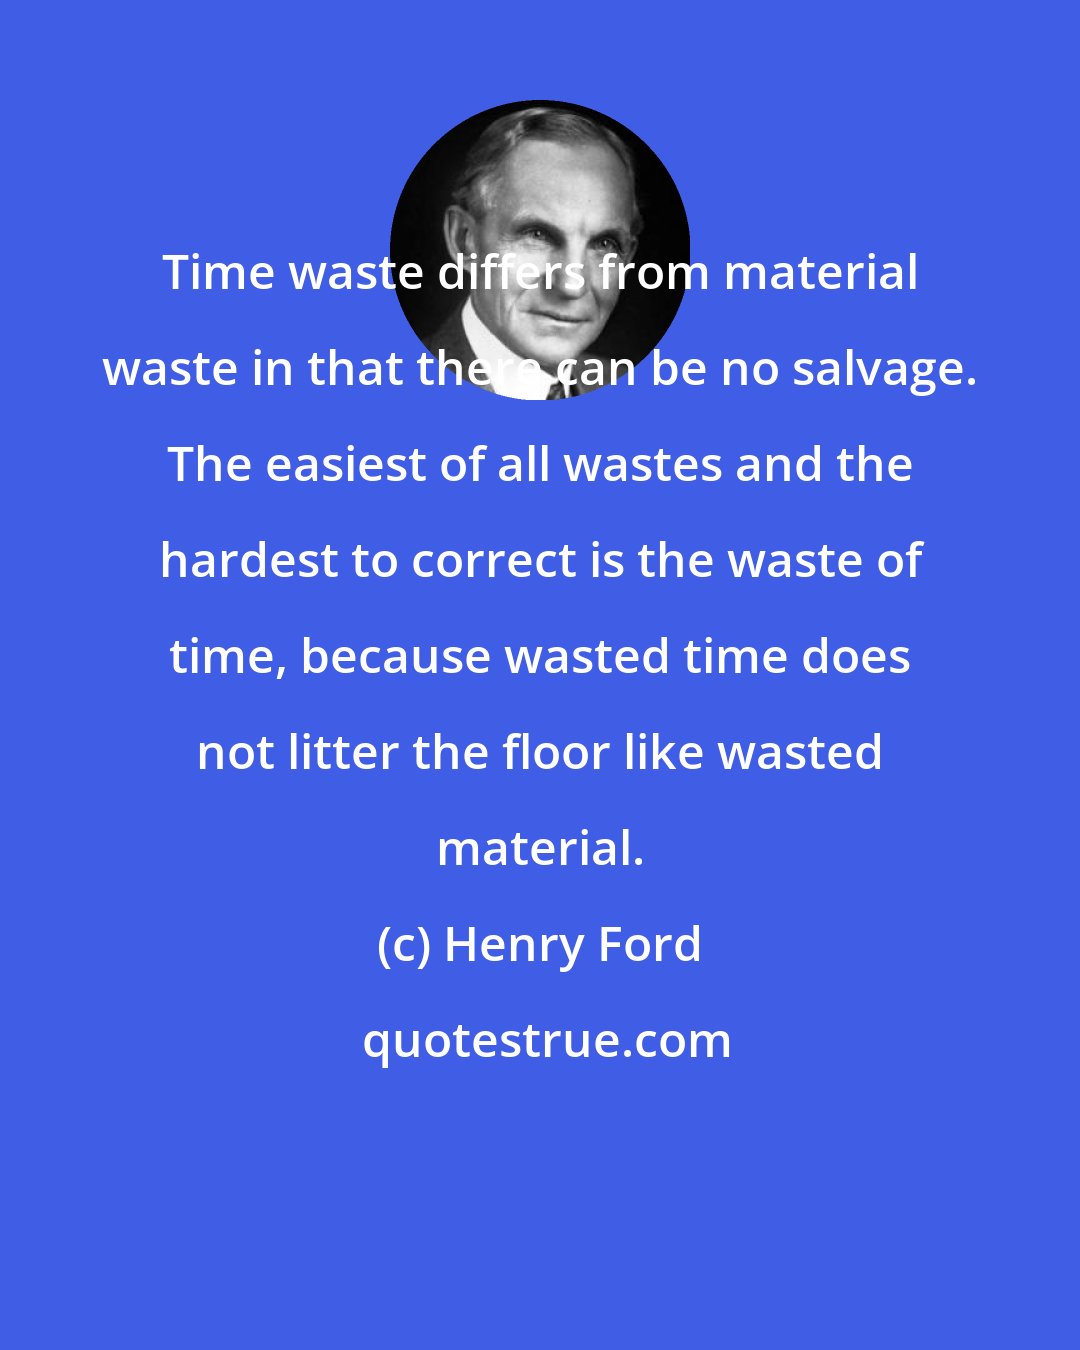 Henry Ford: Time waste differs from material waste in that there can be no salvage. The easiest of all wastes and the hardest to correct is the waste of time, because wasted time does not litter the floor like wasted material.